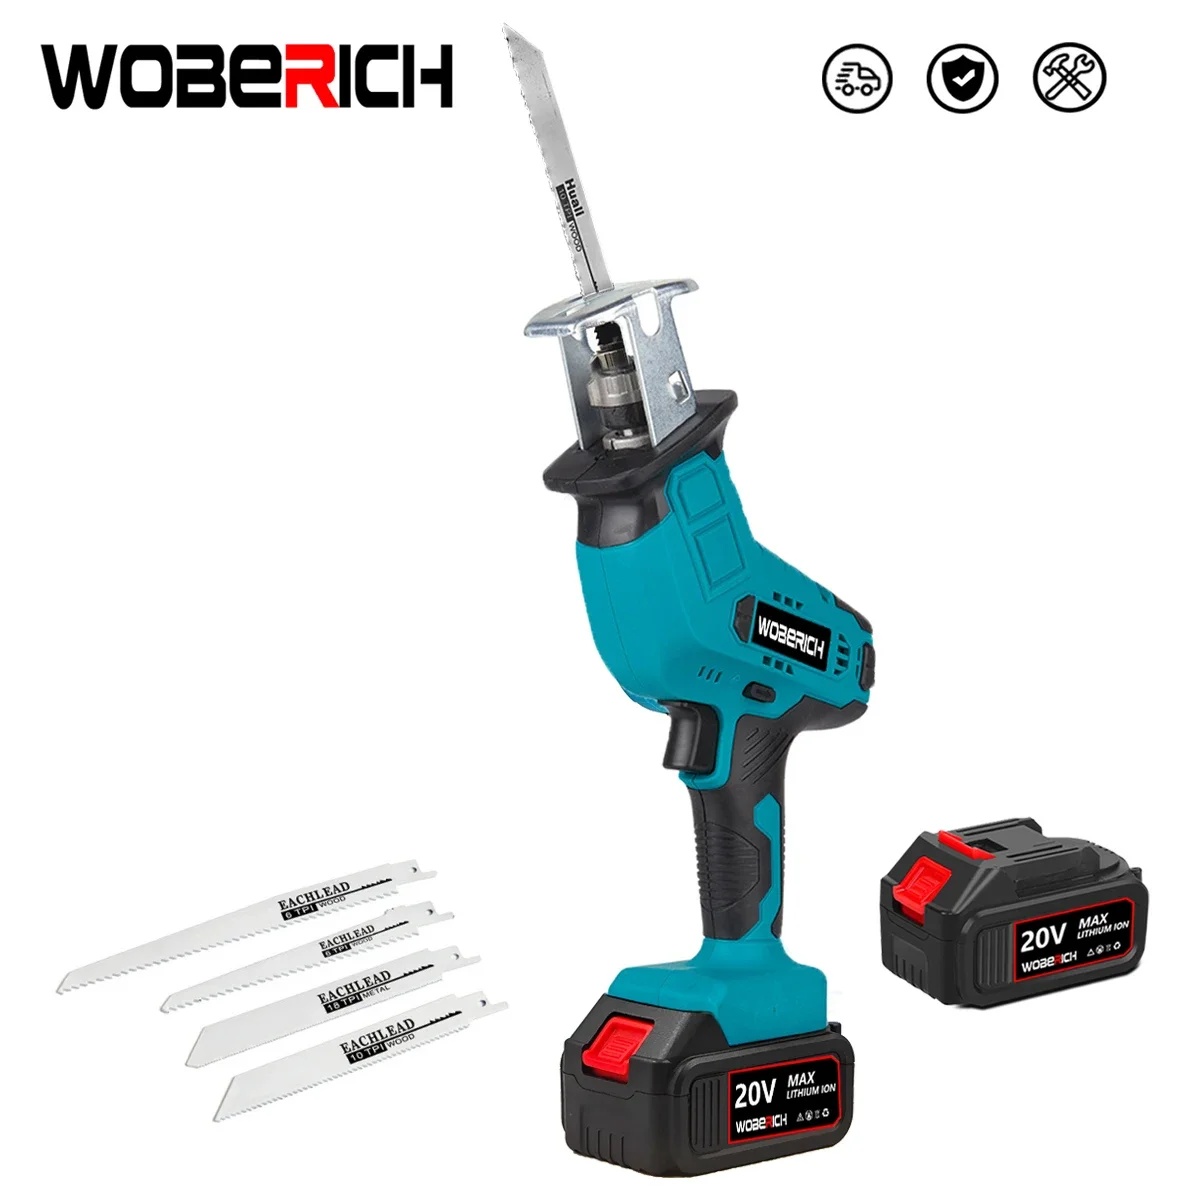 Cordless Reciprocating Saw 18V Adjustable Speed Electric Saw Wood Metal PVC Pipe Cutting fit Makita 18v Battery By WOBERICH cordless reciprocating saw adjustable speed chainsaw wood metal pvc pipe cutting bandsaw power tool for makita 18v battery